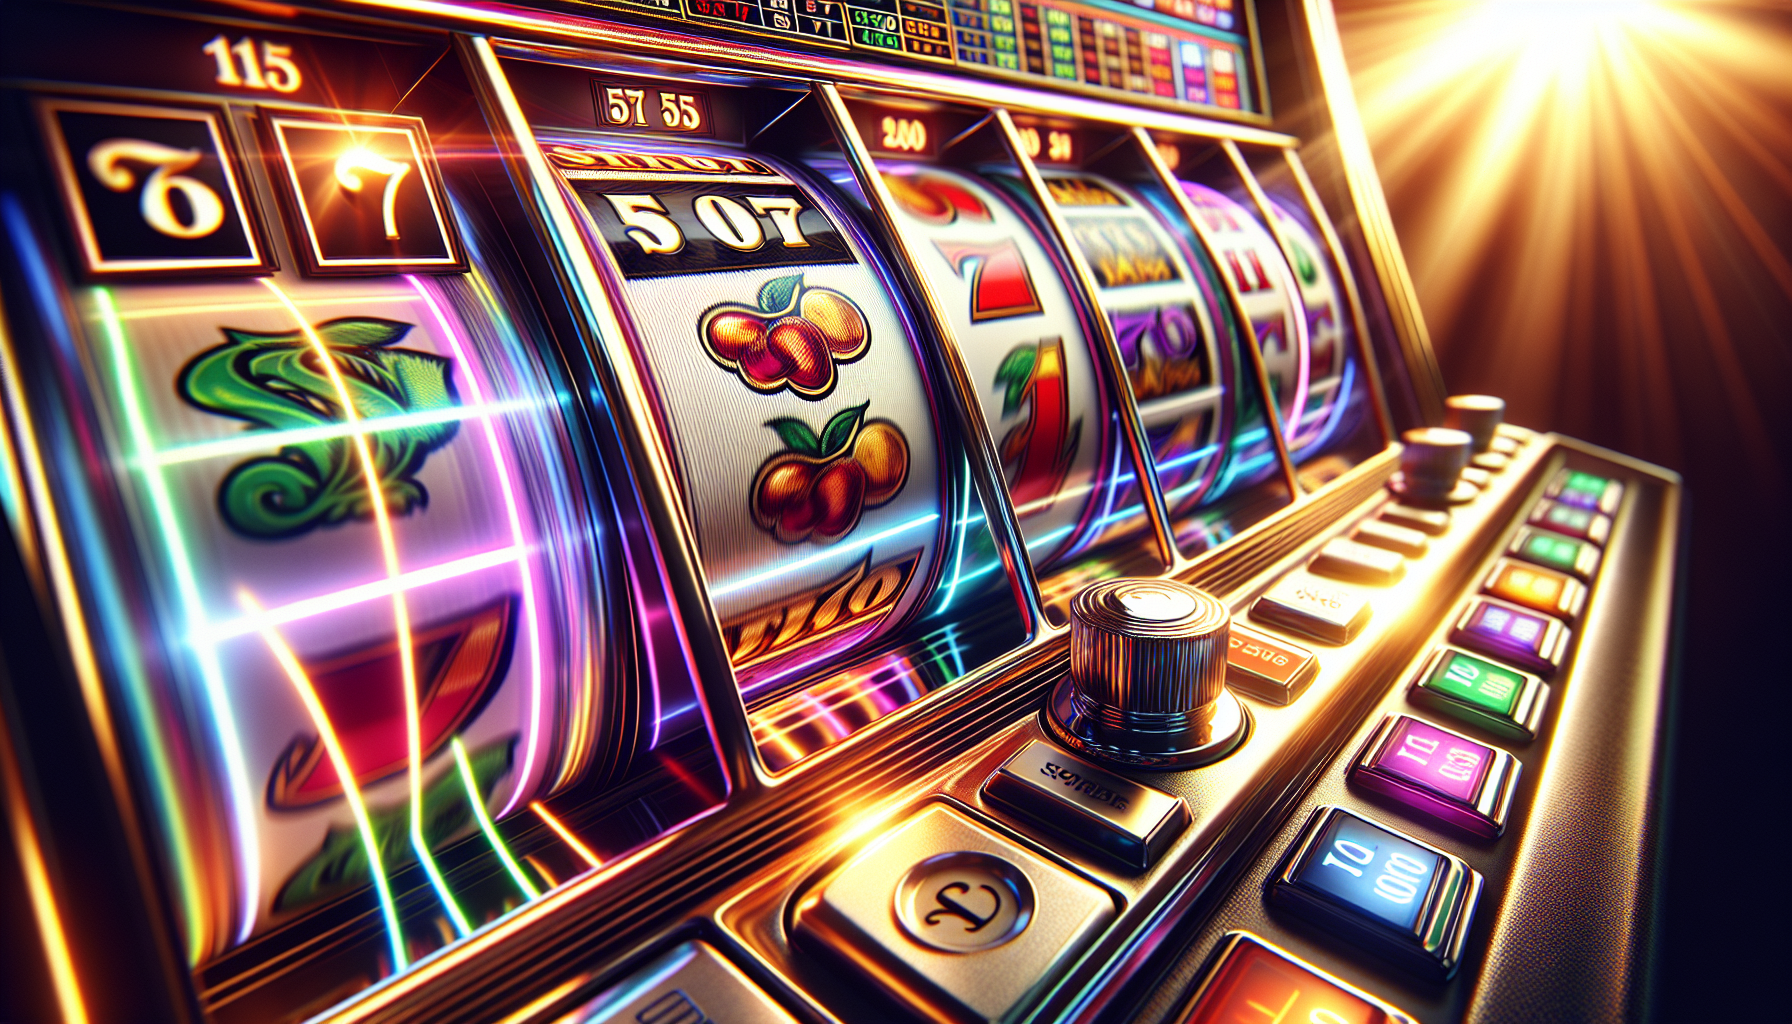 Should I Stop The Reels On A Slot Machine?